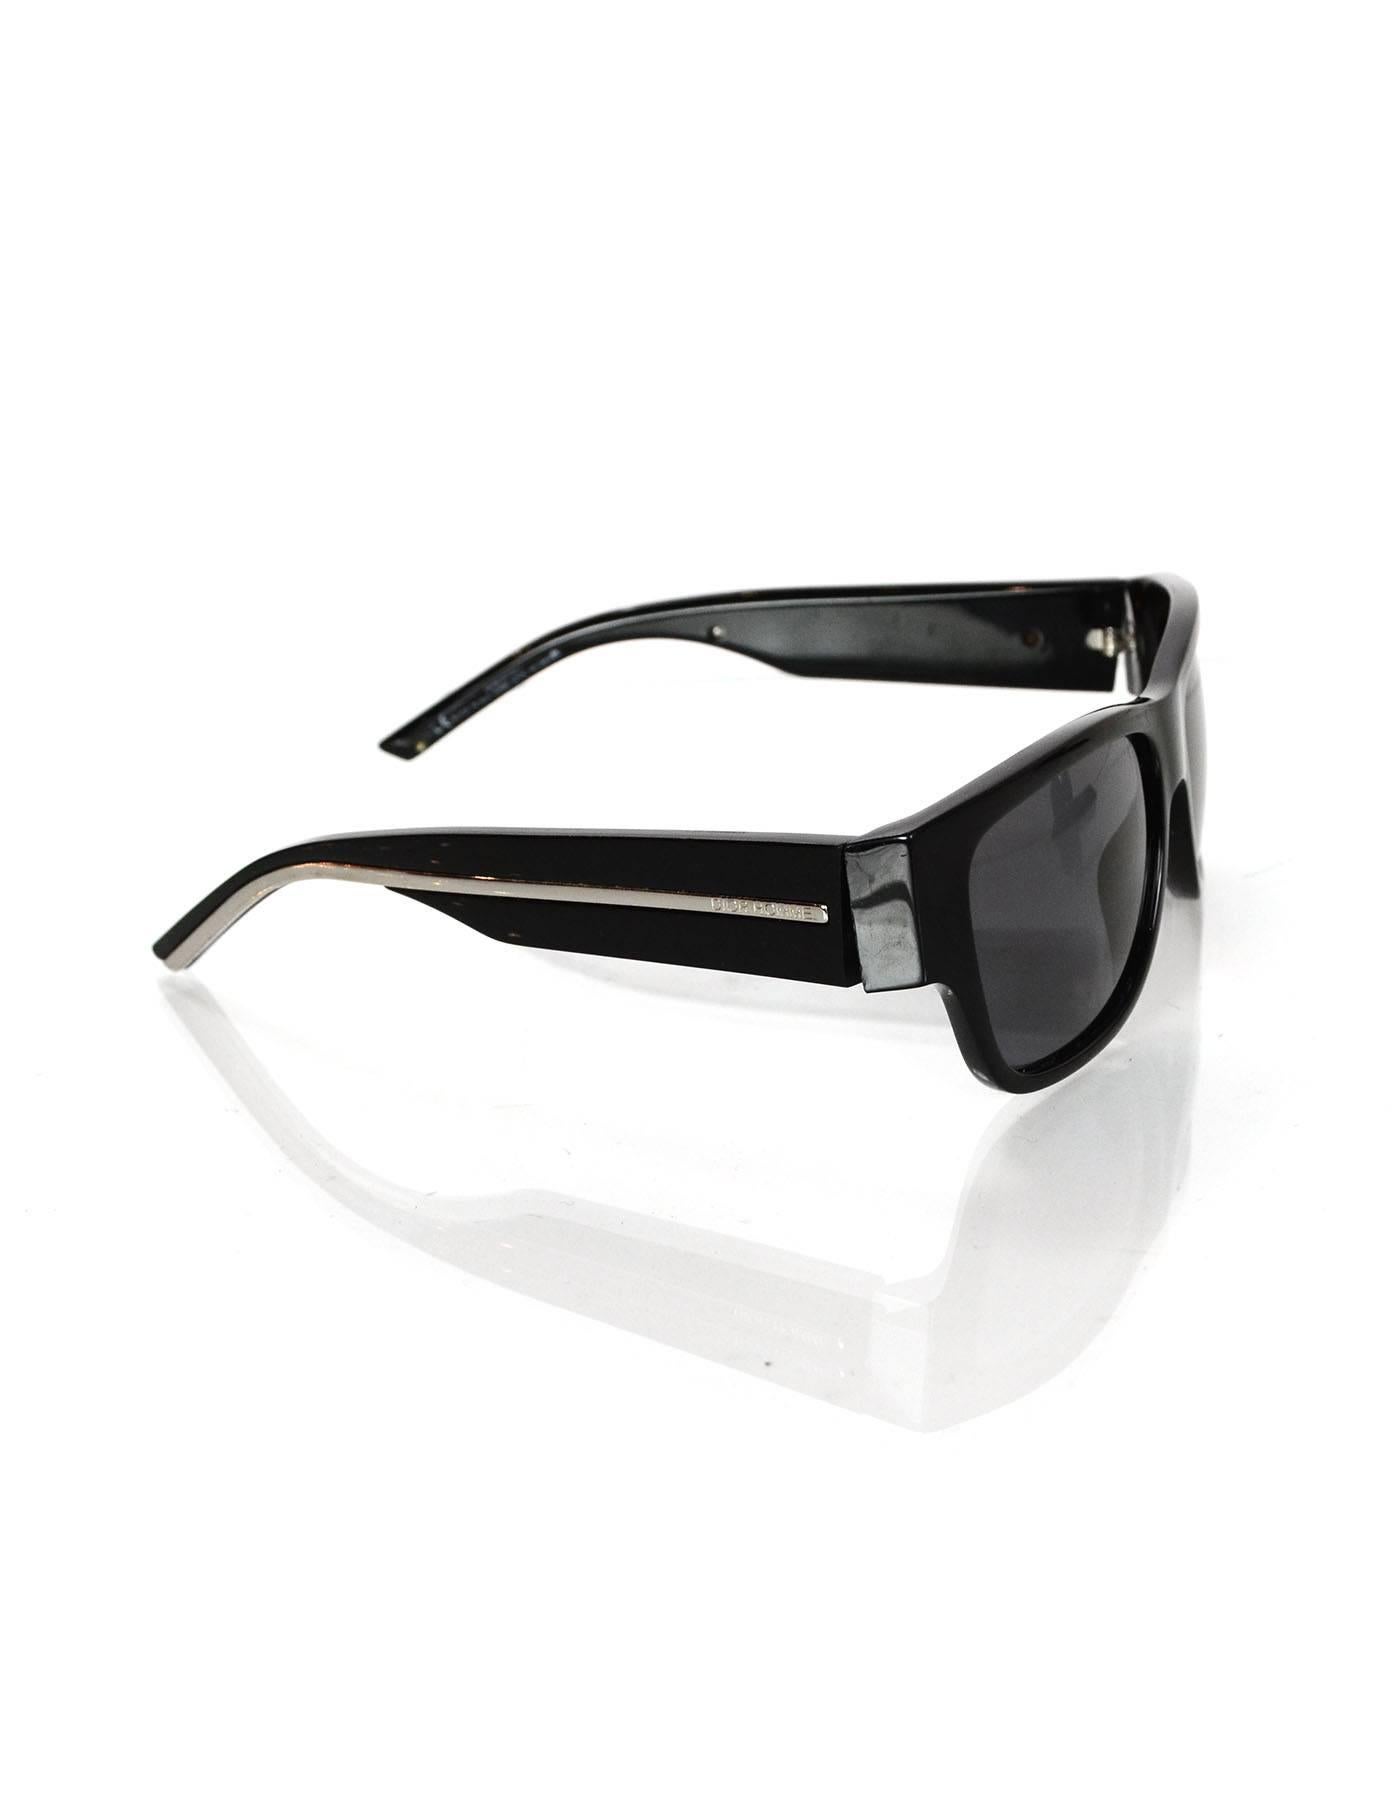 100% Authentic Dior Homme Black Sunglasses. Features silvertone stripe on the arms with logo. Rectangle shape. Very good pre-owned condition with the exception of misaligned arms.

Made In: Italy
Color: Black
Materials: Resin
Overall Condition: Very